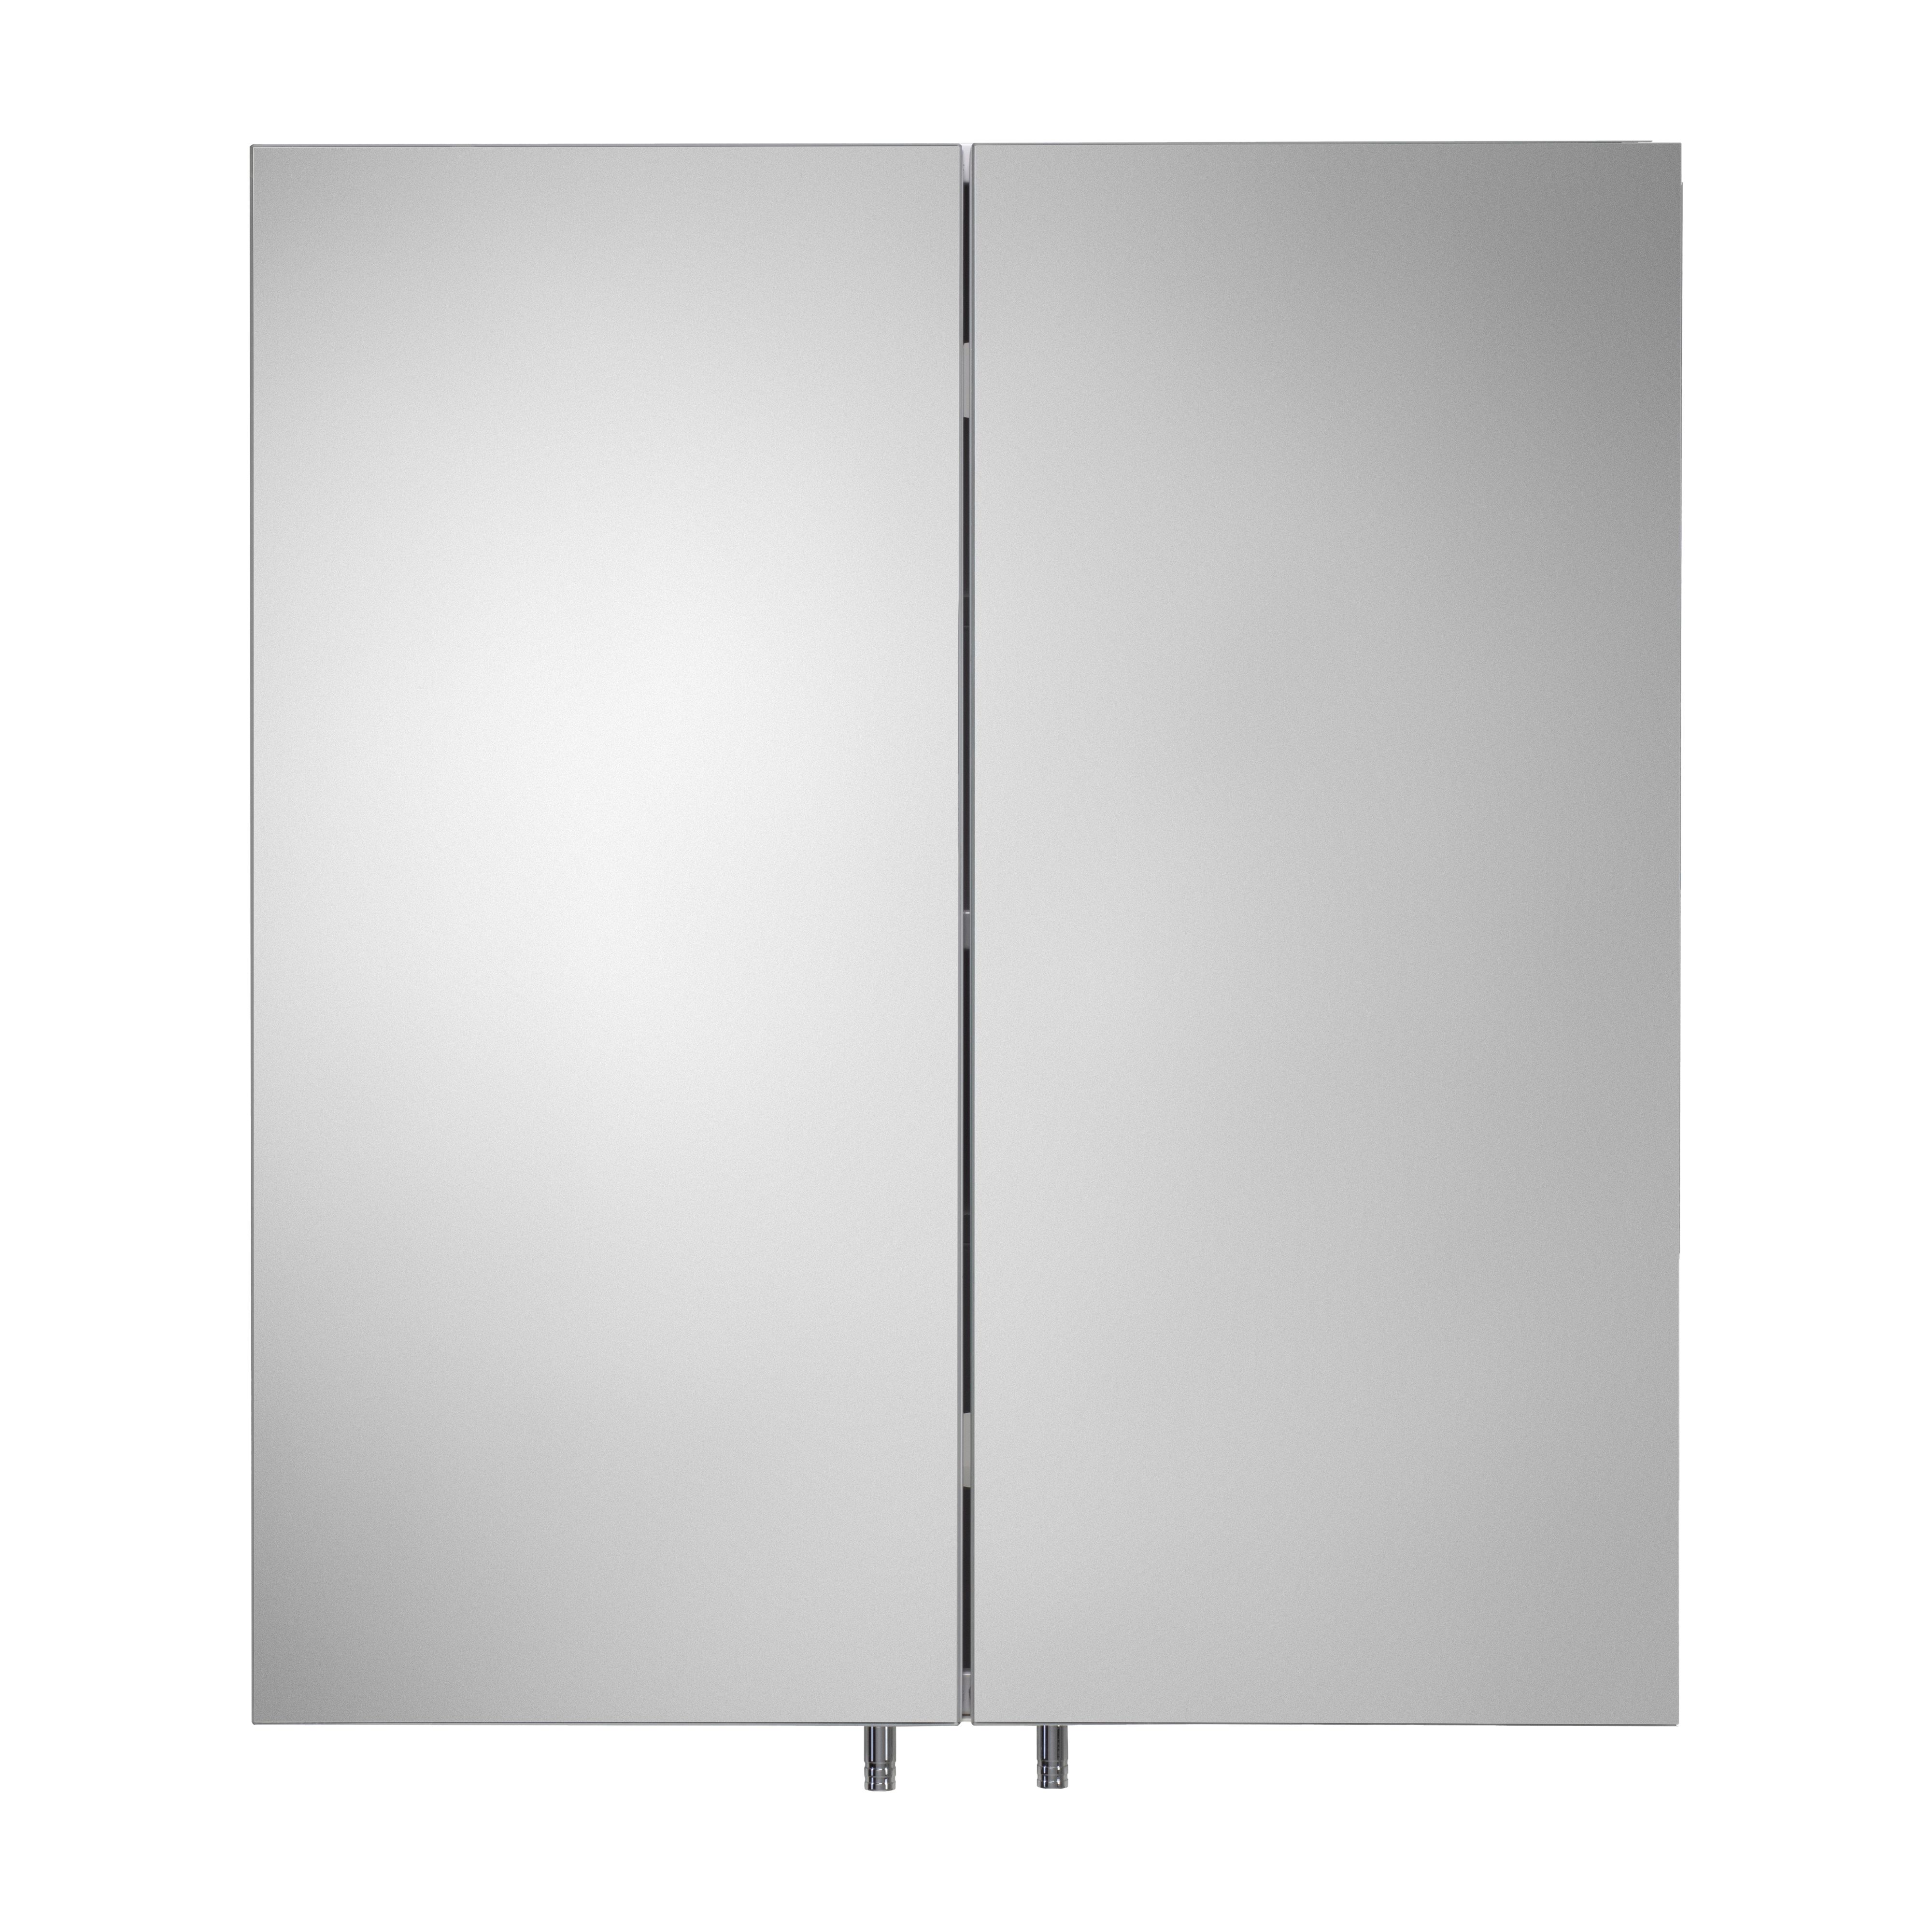 Croydex Dawley White Double Bathroom Wall cabinet With 2 mirror doors (H)690mm (W)600mm